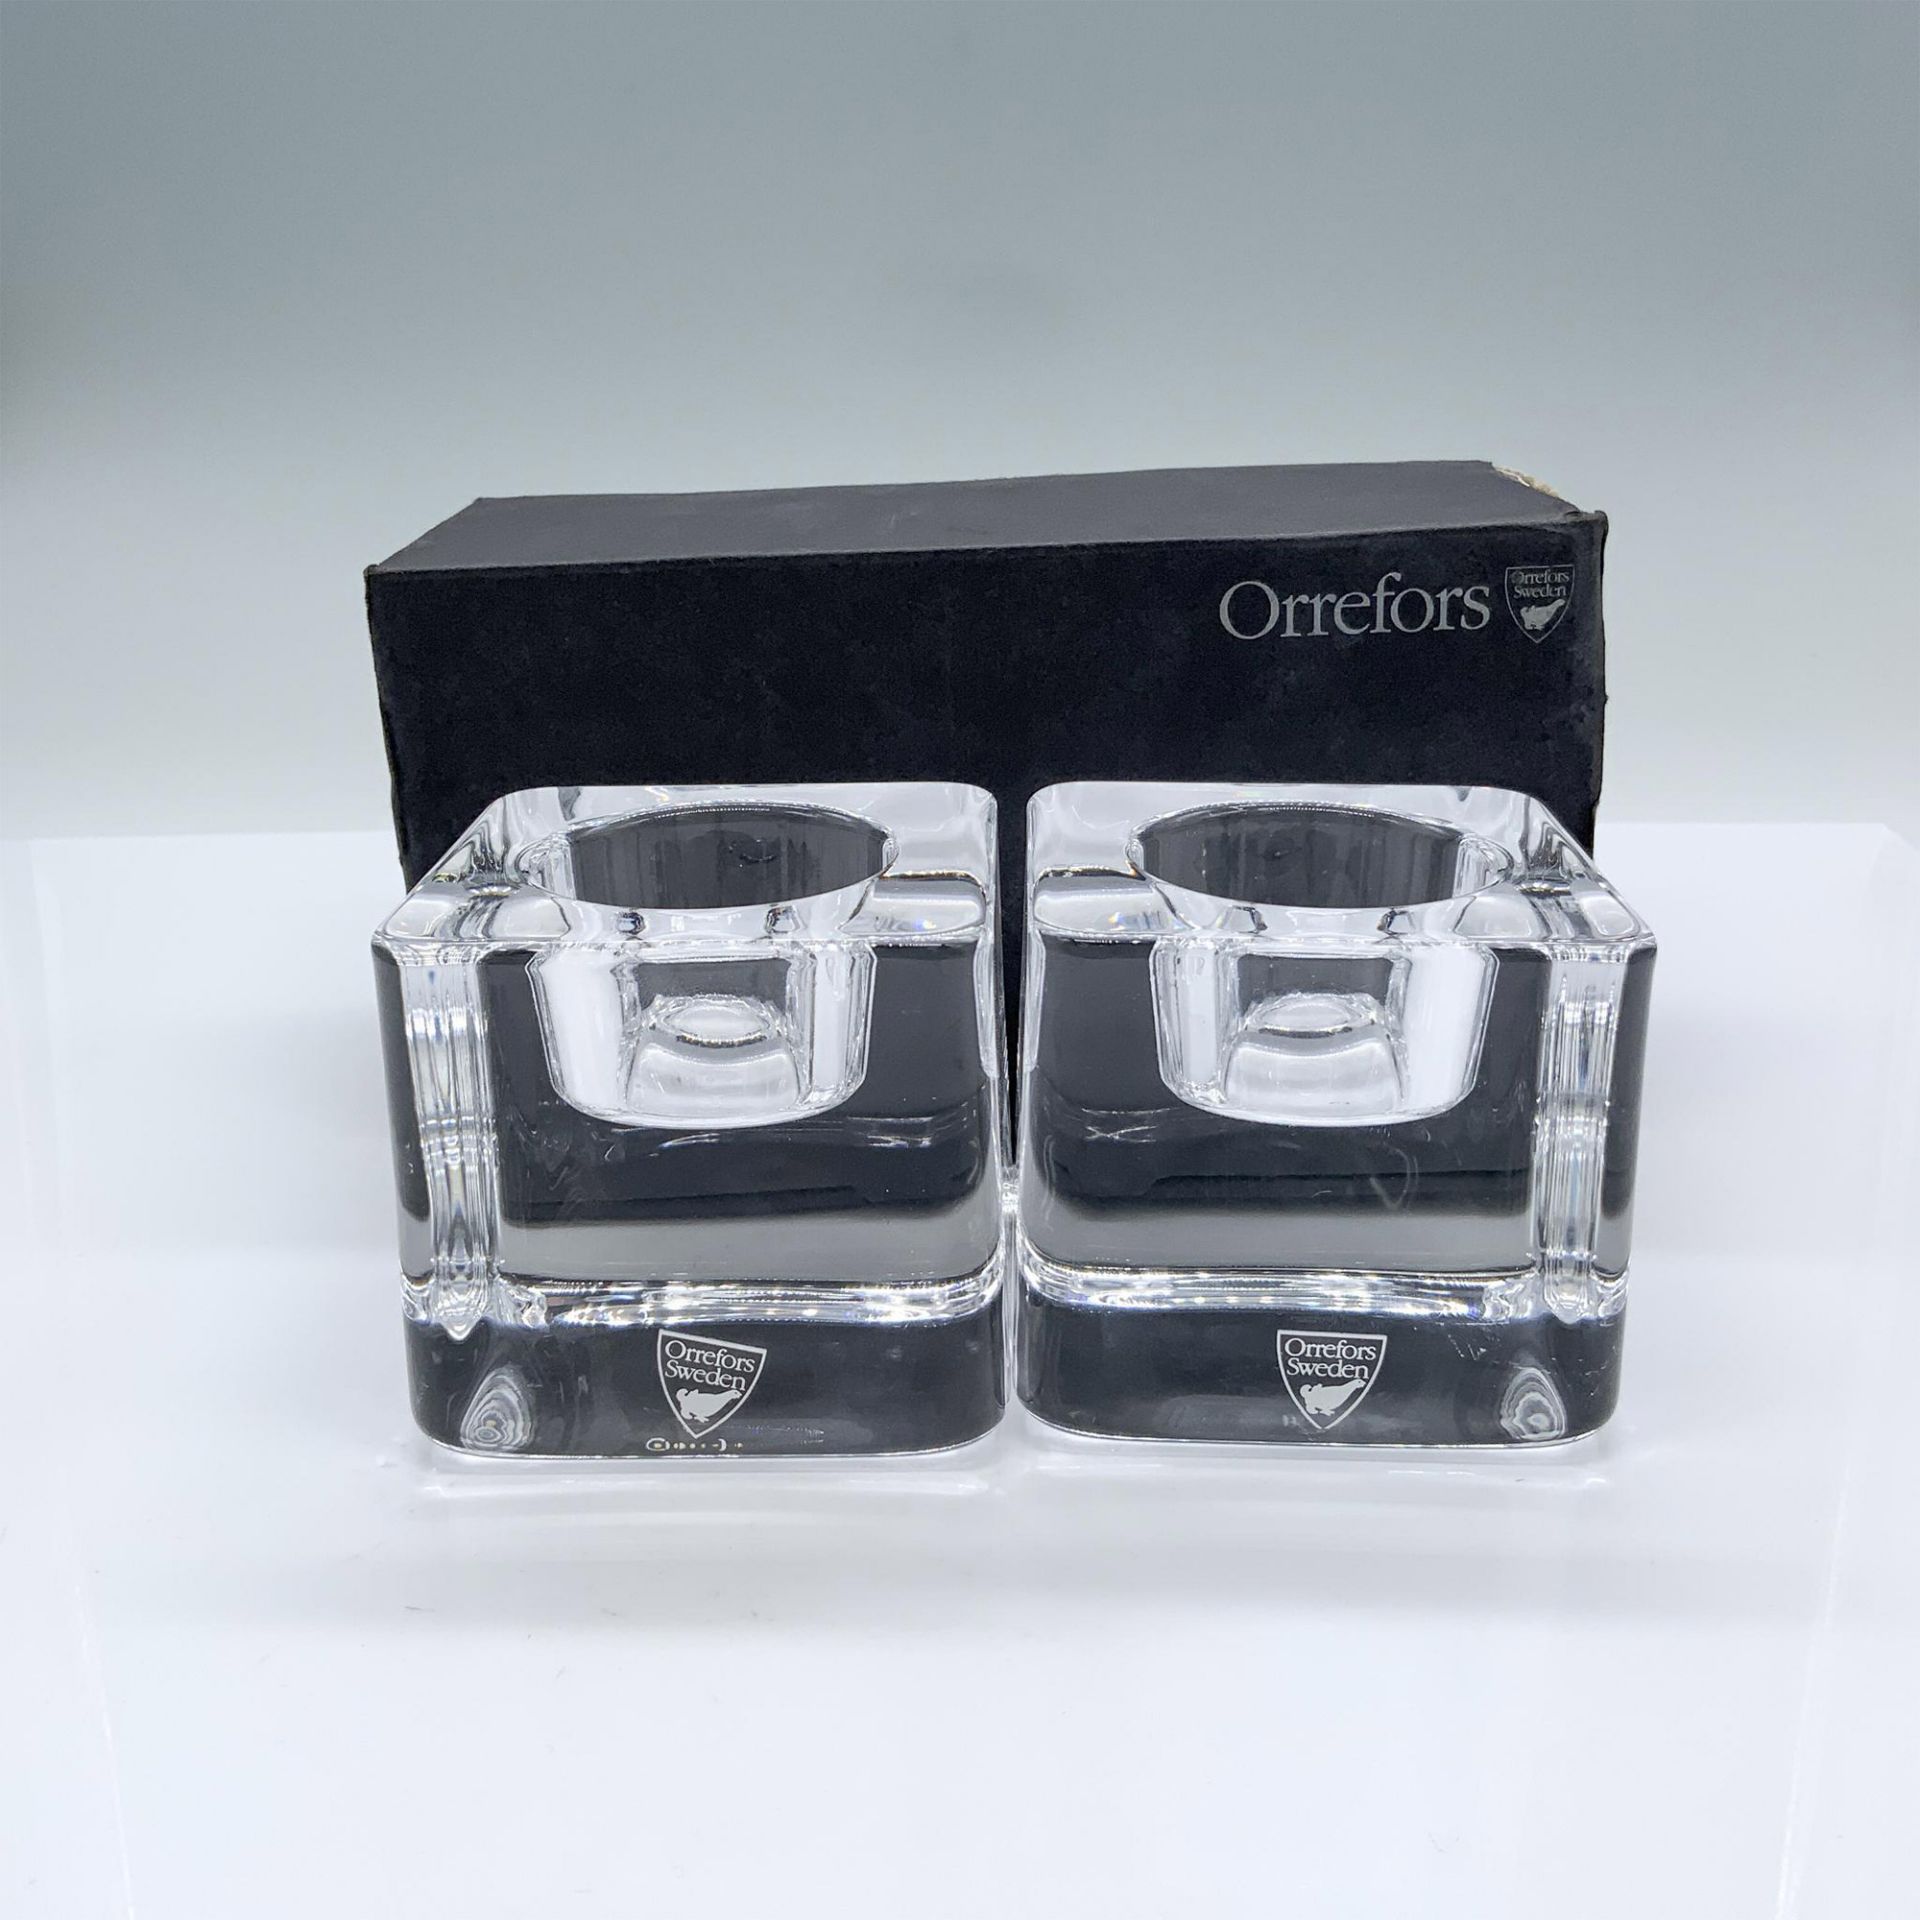 Pair of Orrefors Crystal Ice Cube Candle Holders - Image 5 of 5